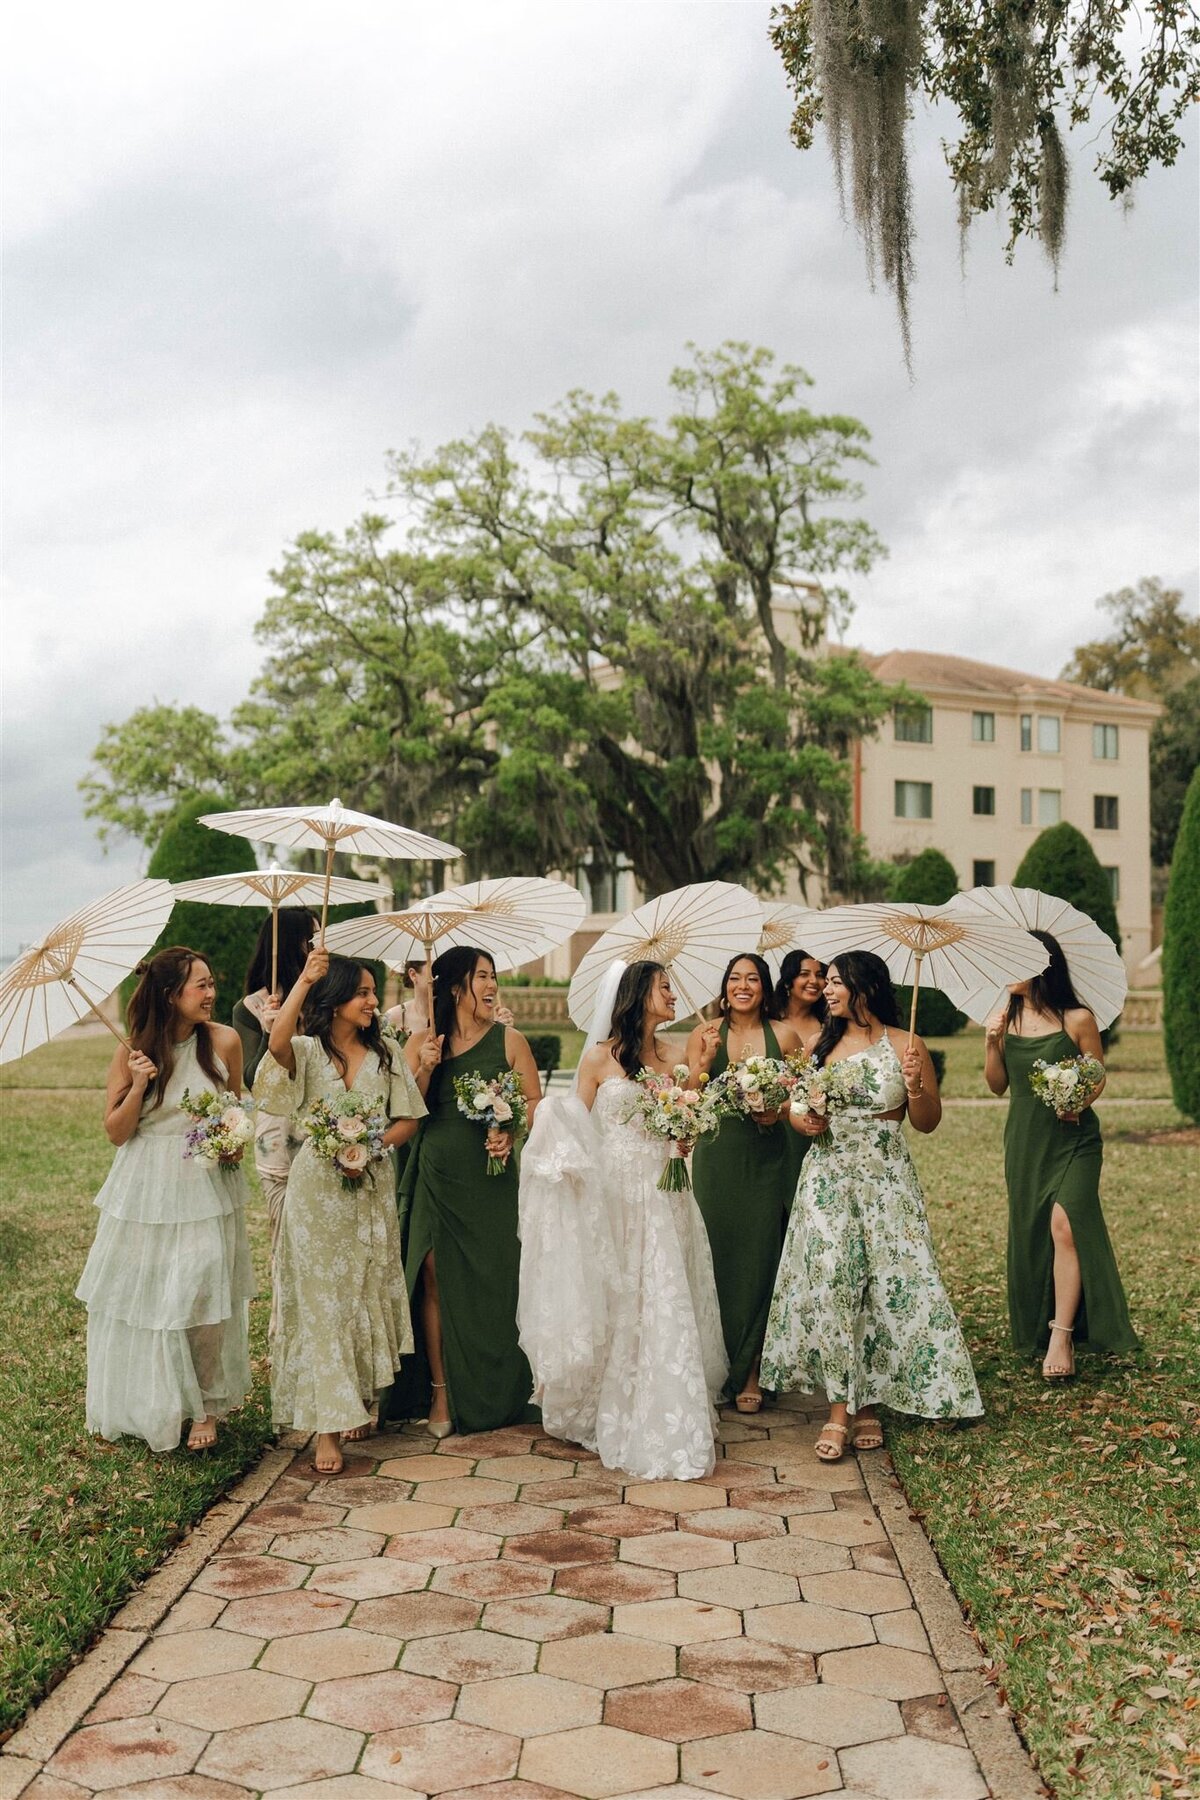 g+n-day2-bridal-party-78_websize